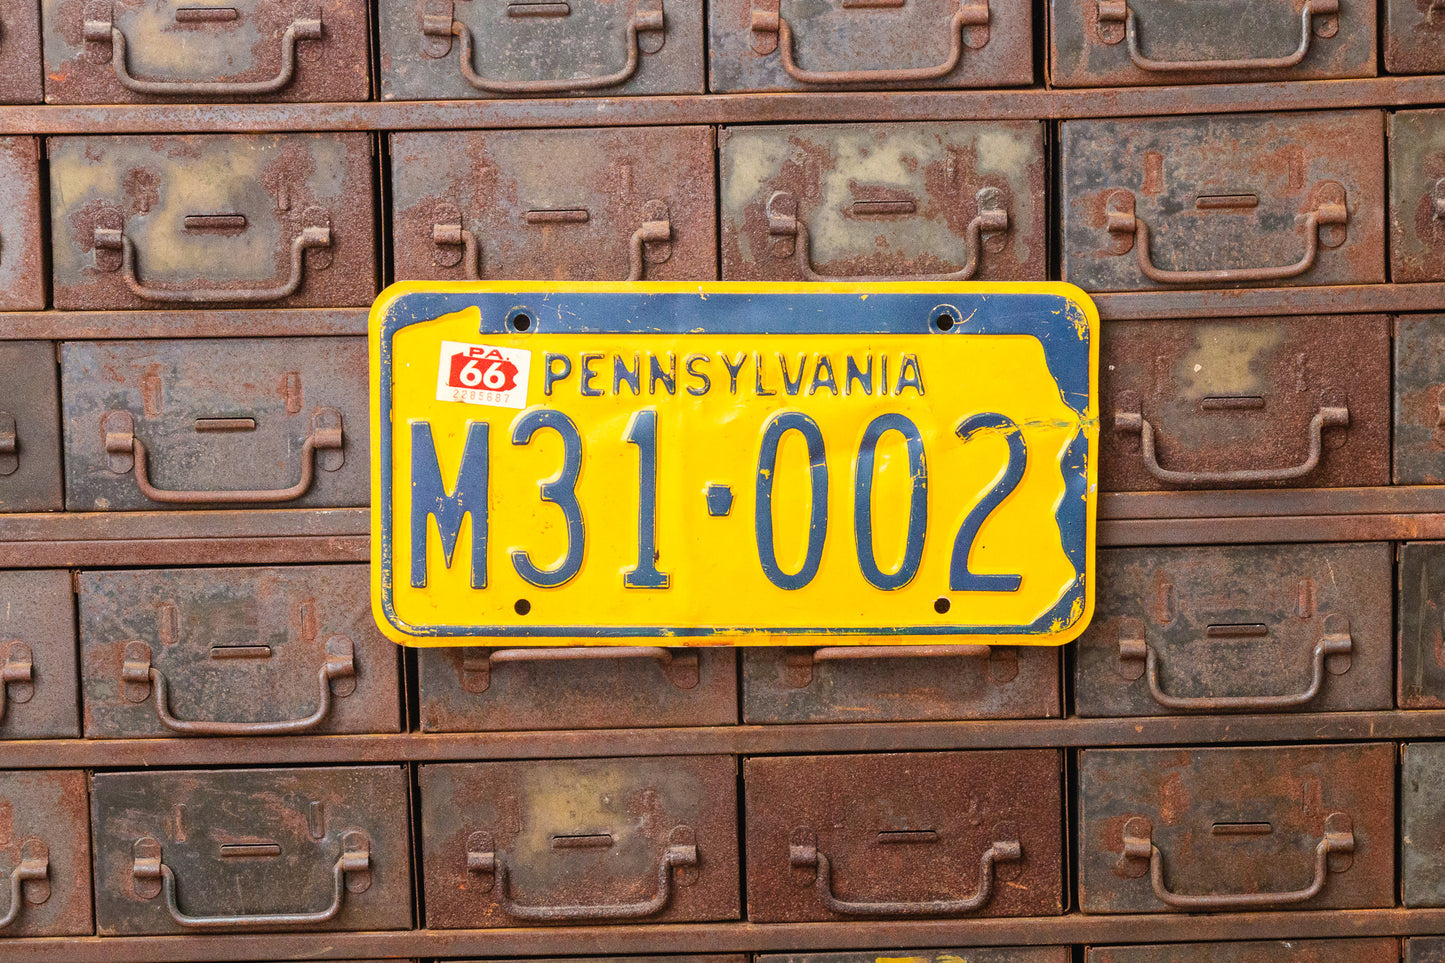 Pennsylvania 1966 License Plate Vintage State Shaped Wall Decor - Eagle's Eye Finds